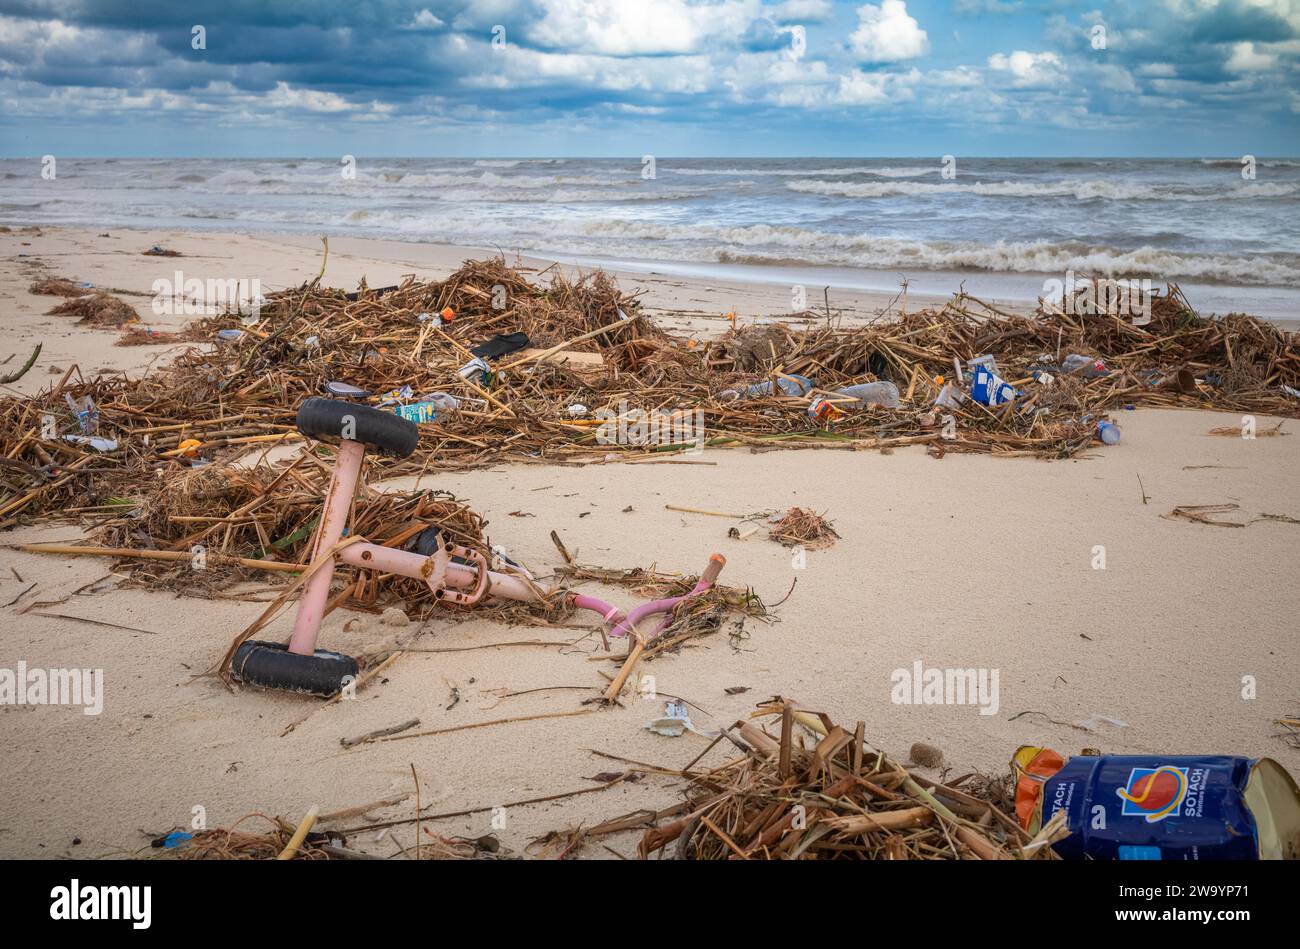 Vegetation mixed with metal and plastic waste and a washed up child's tricycle on a tourist beach in Sousse, Tunisia. Stock Photo